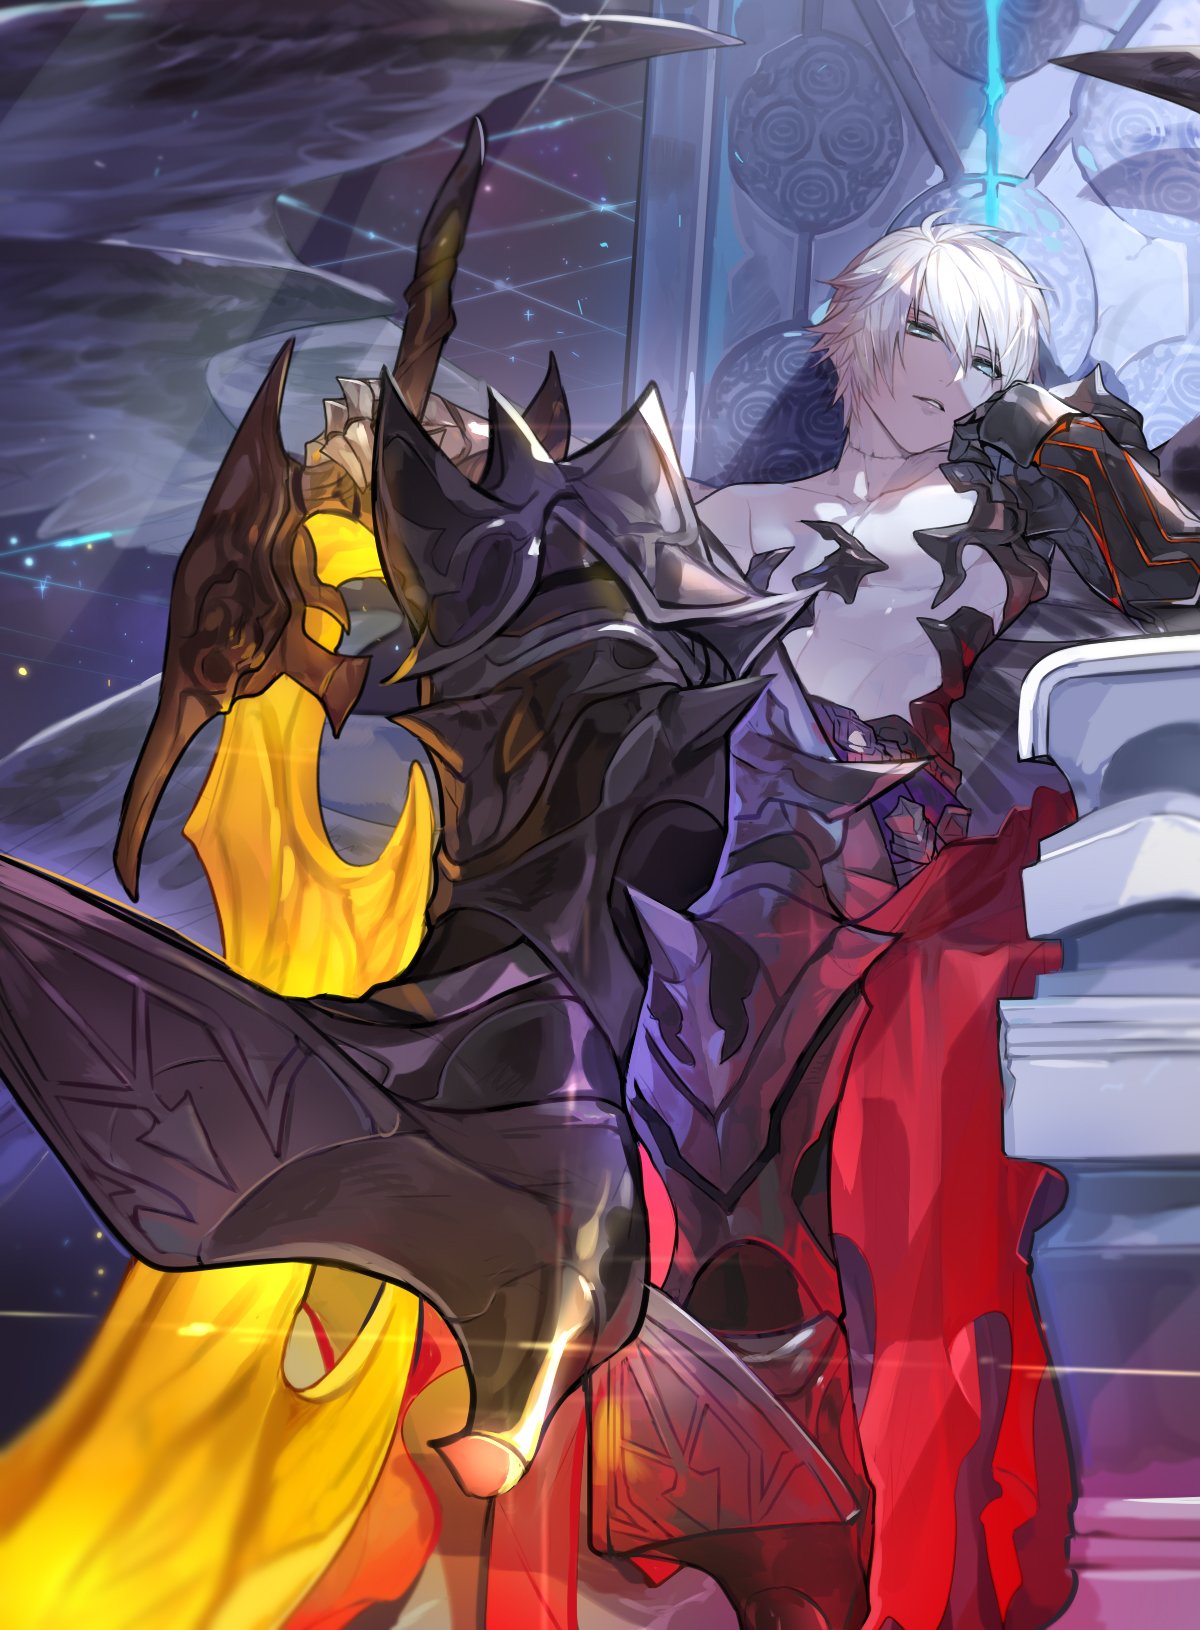 1boy black_footwear blue_eyes gauntlets granblue_fantasy hair_between_eyes high_heels highres holding holding_sword holding_weapon legs_crossed looking_at_viewer lucilius_(granblue_fantasy) male_focus open_mouth picube525528 short_hair shoulder_armor silver_hair sword throne weapon white_hair